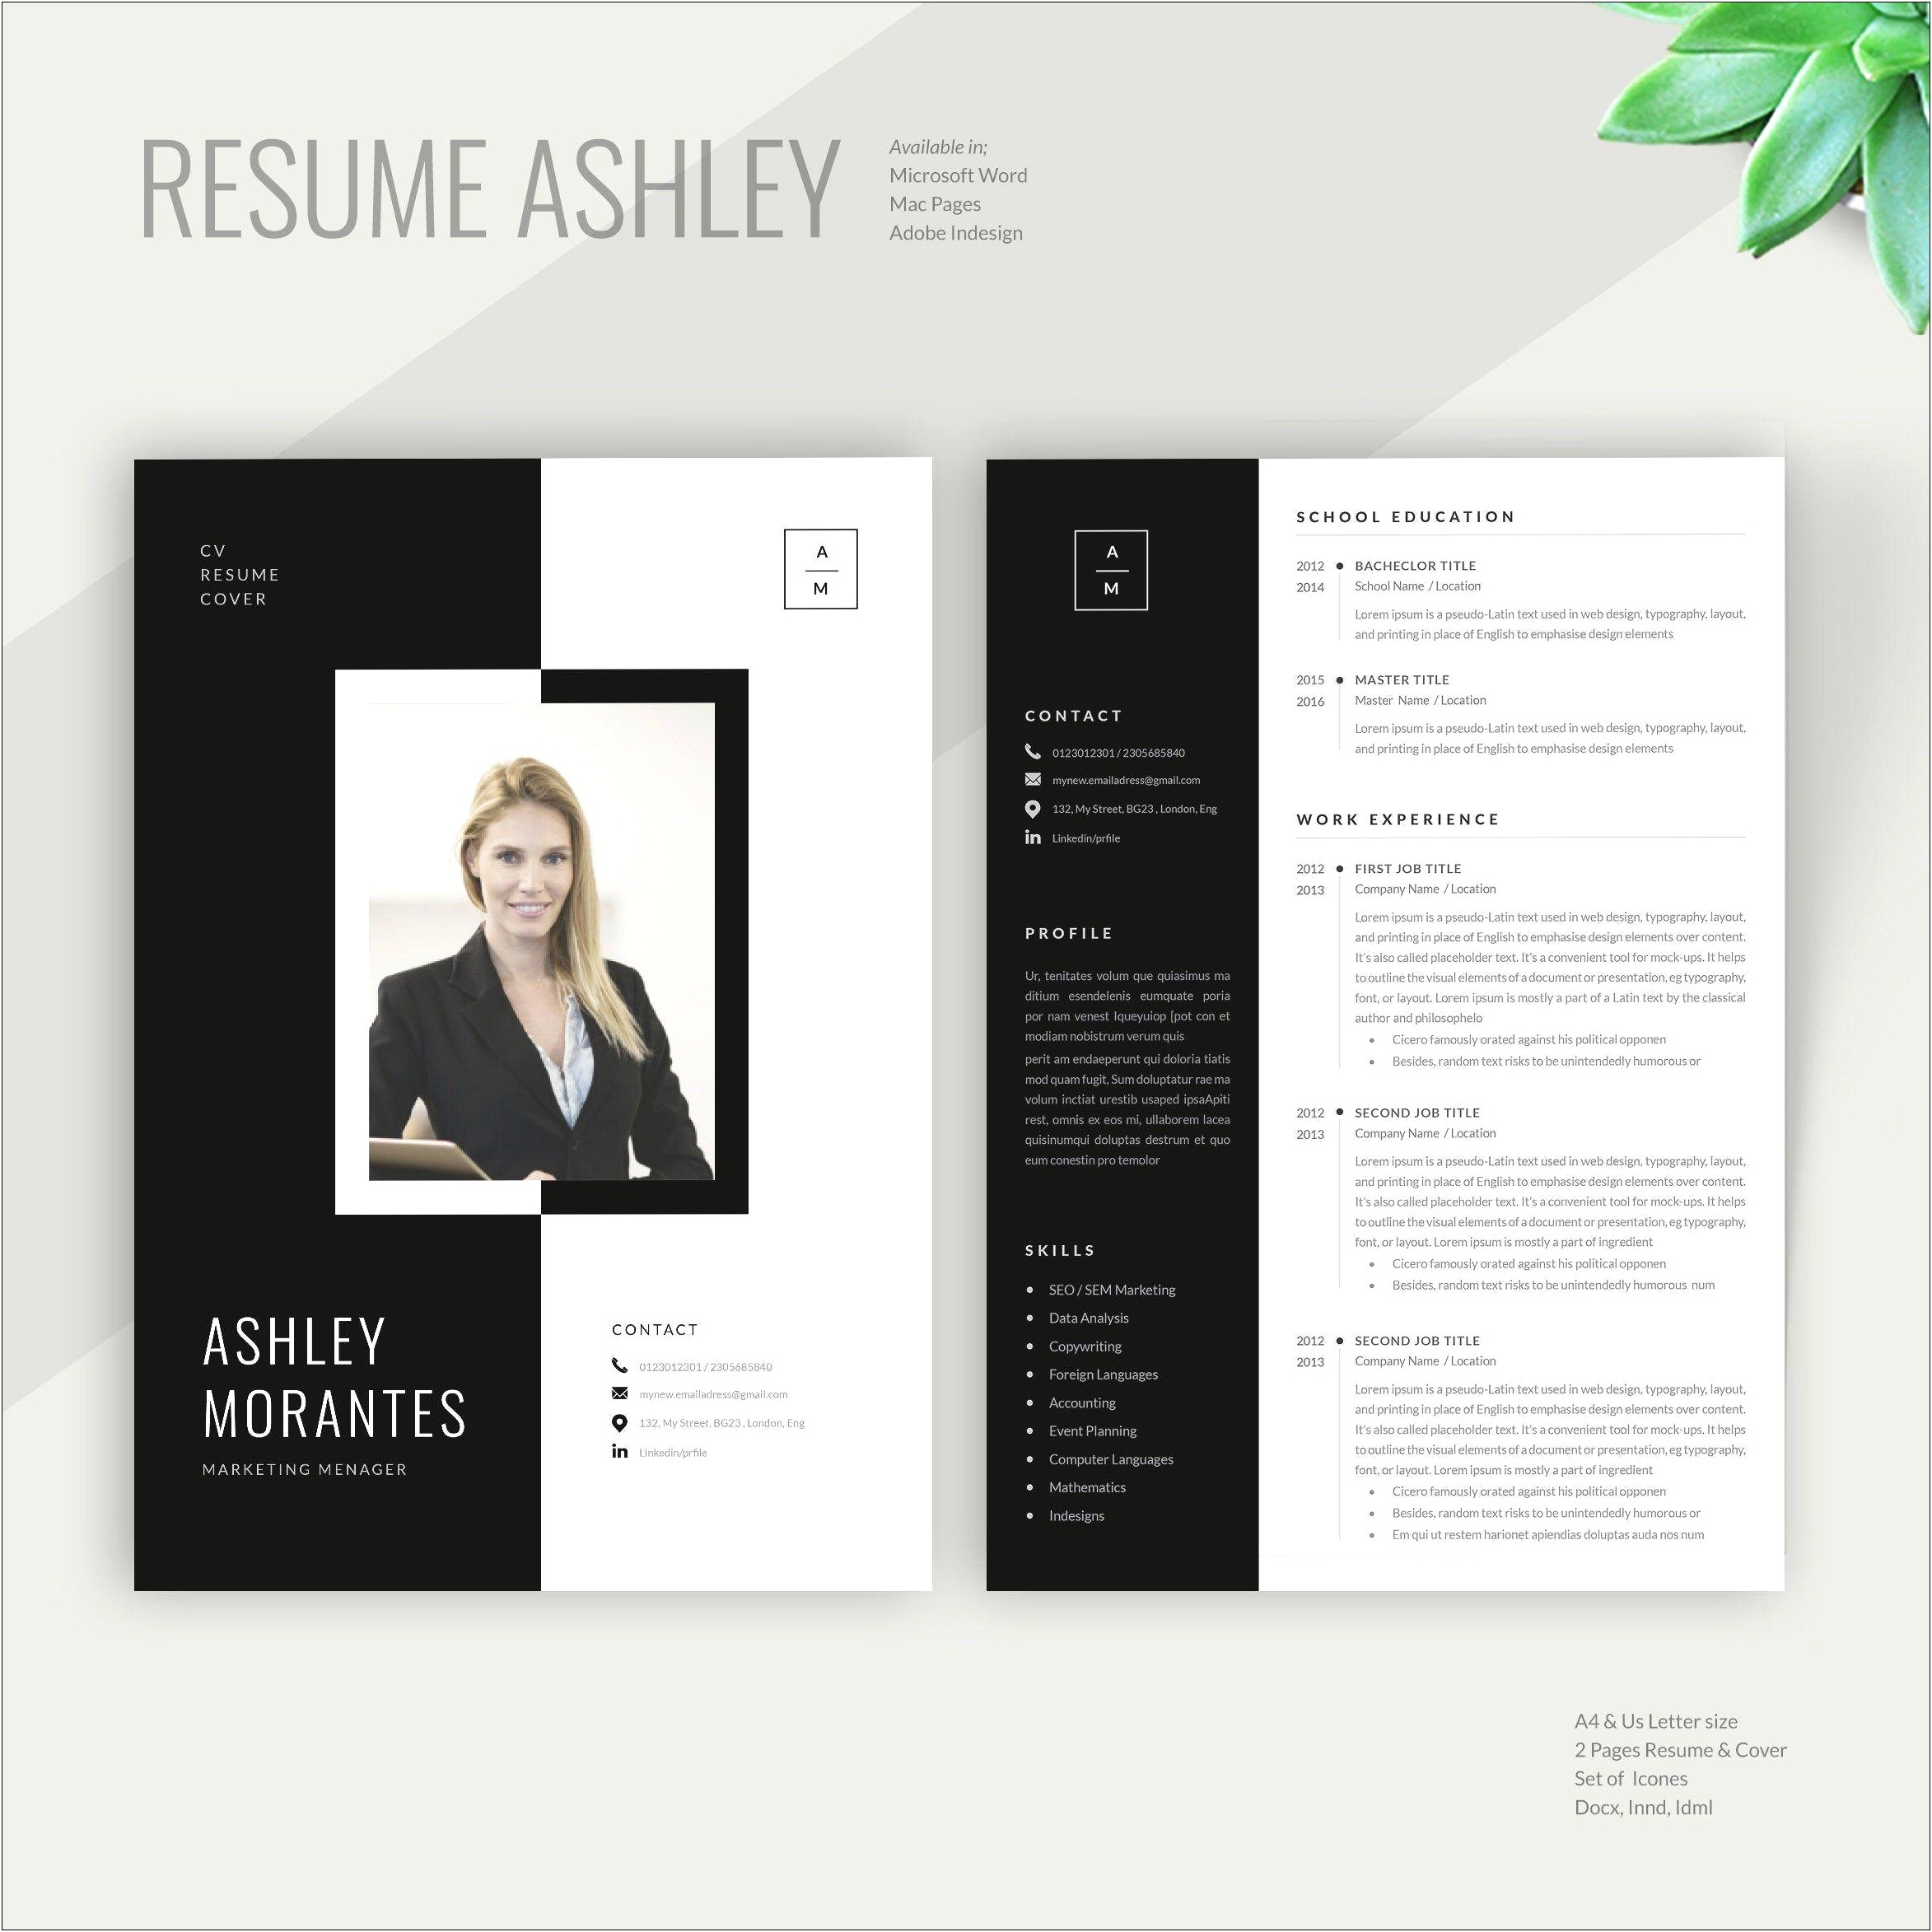 Resume And Cover Letter Pdf Or Word